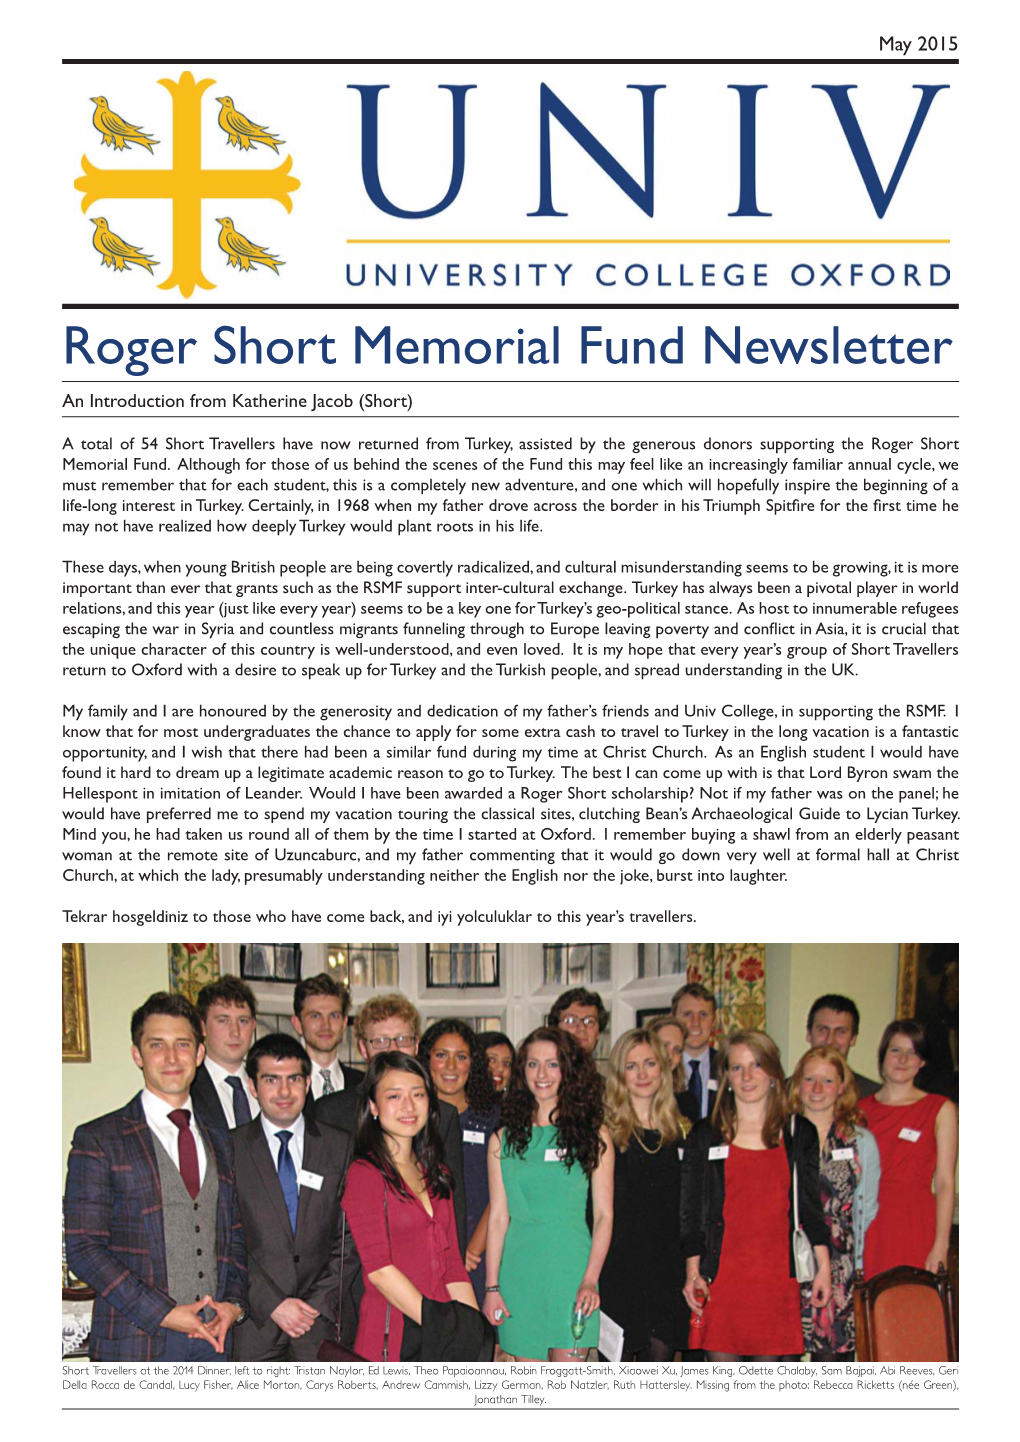 Roger Short Memorial Fund Newsletter an Introduction from Katherine Jacob (Short)